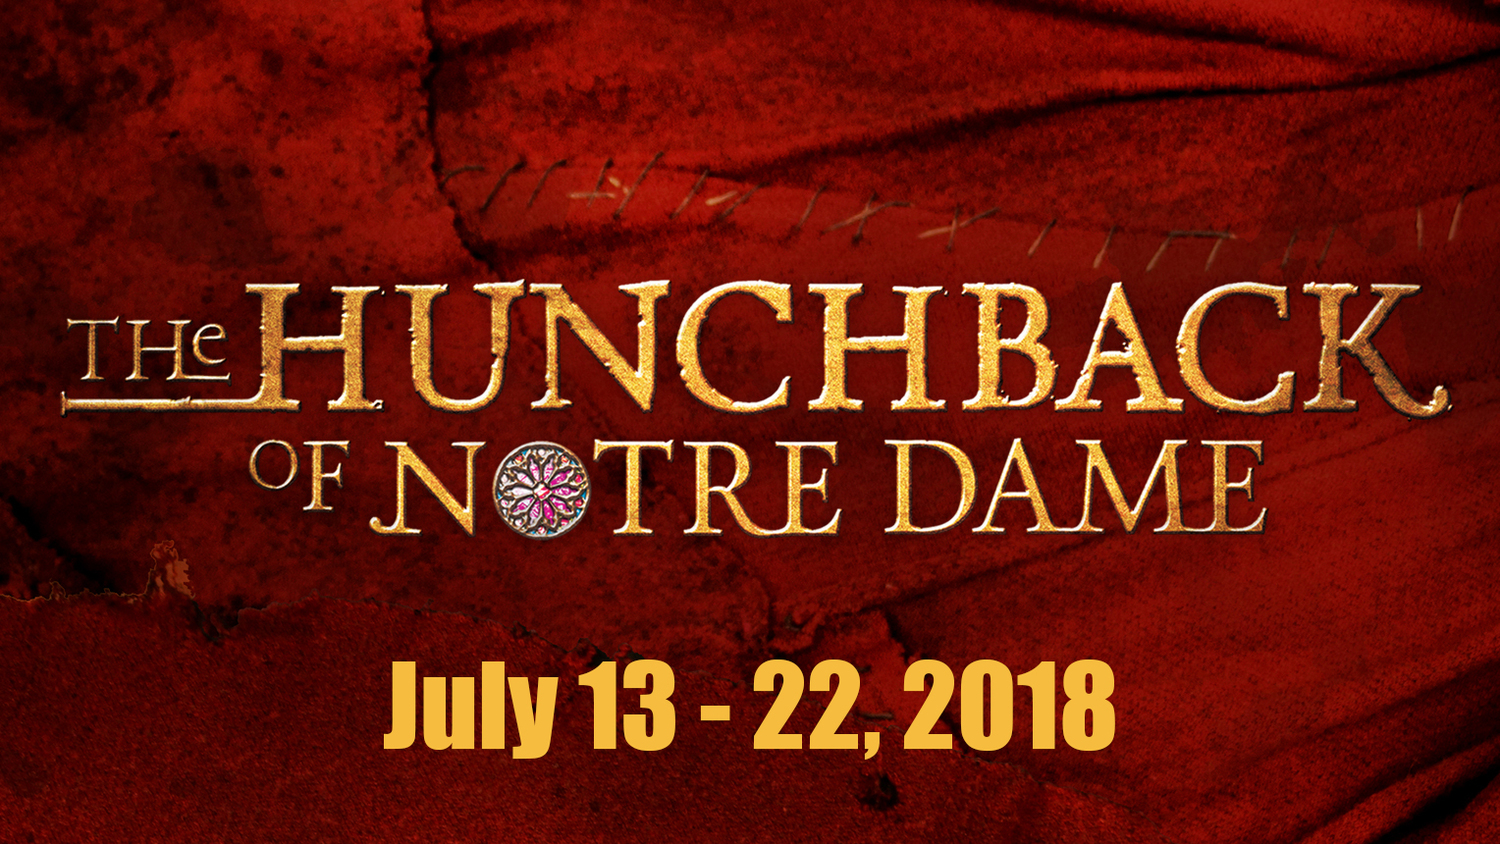 THE HUNCHBACK OF NOTRE DAME Comes To Kudzu Playhouse 7/13 